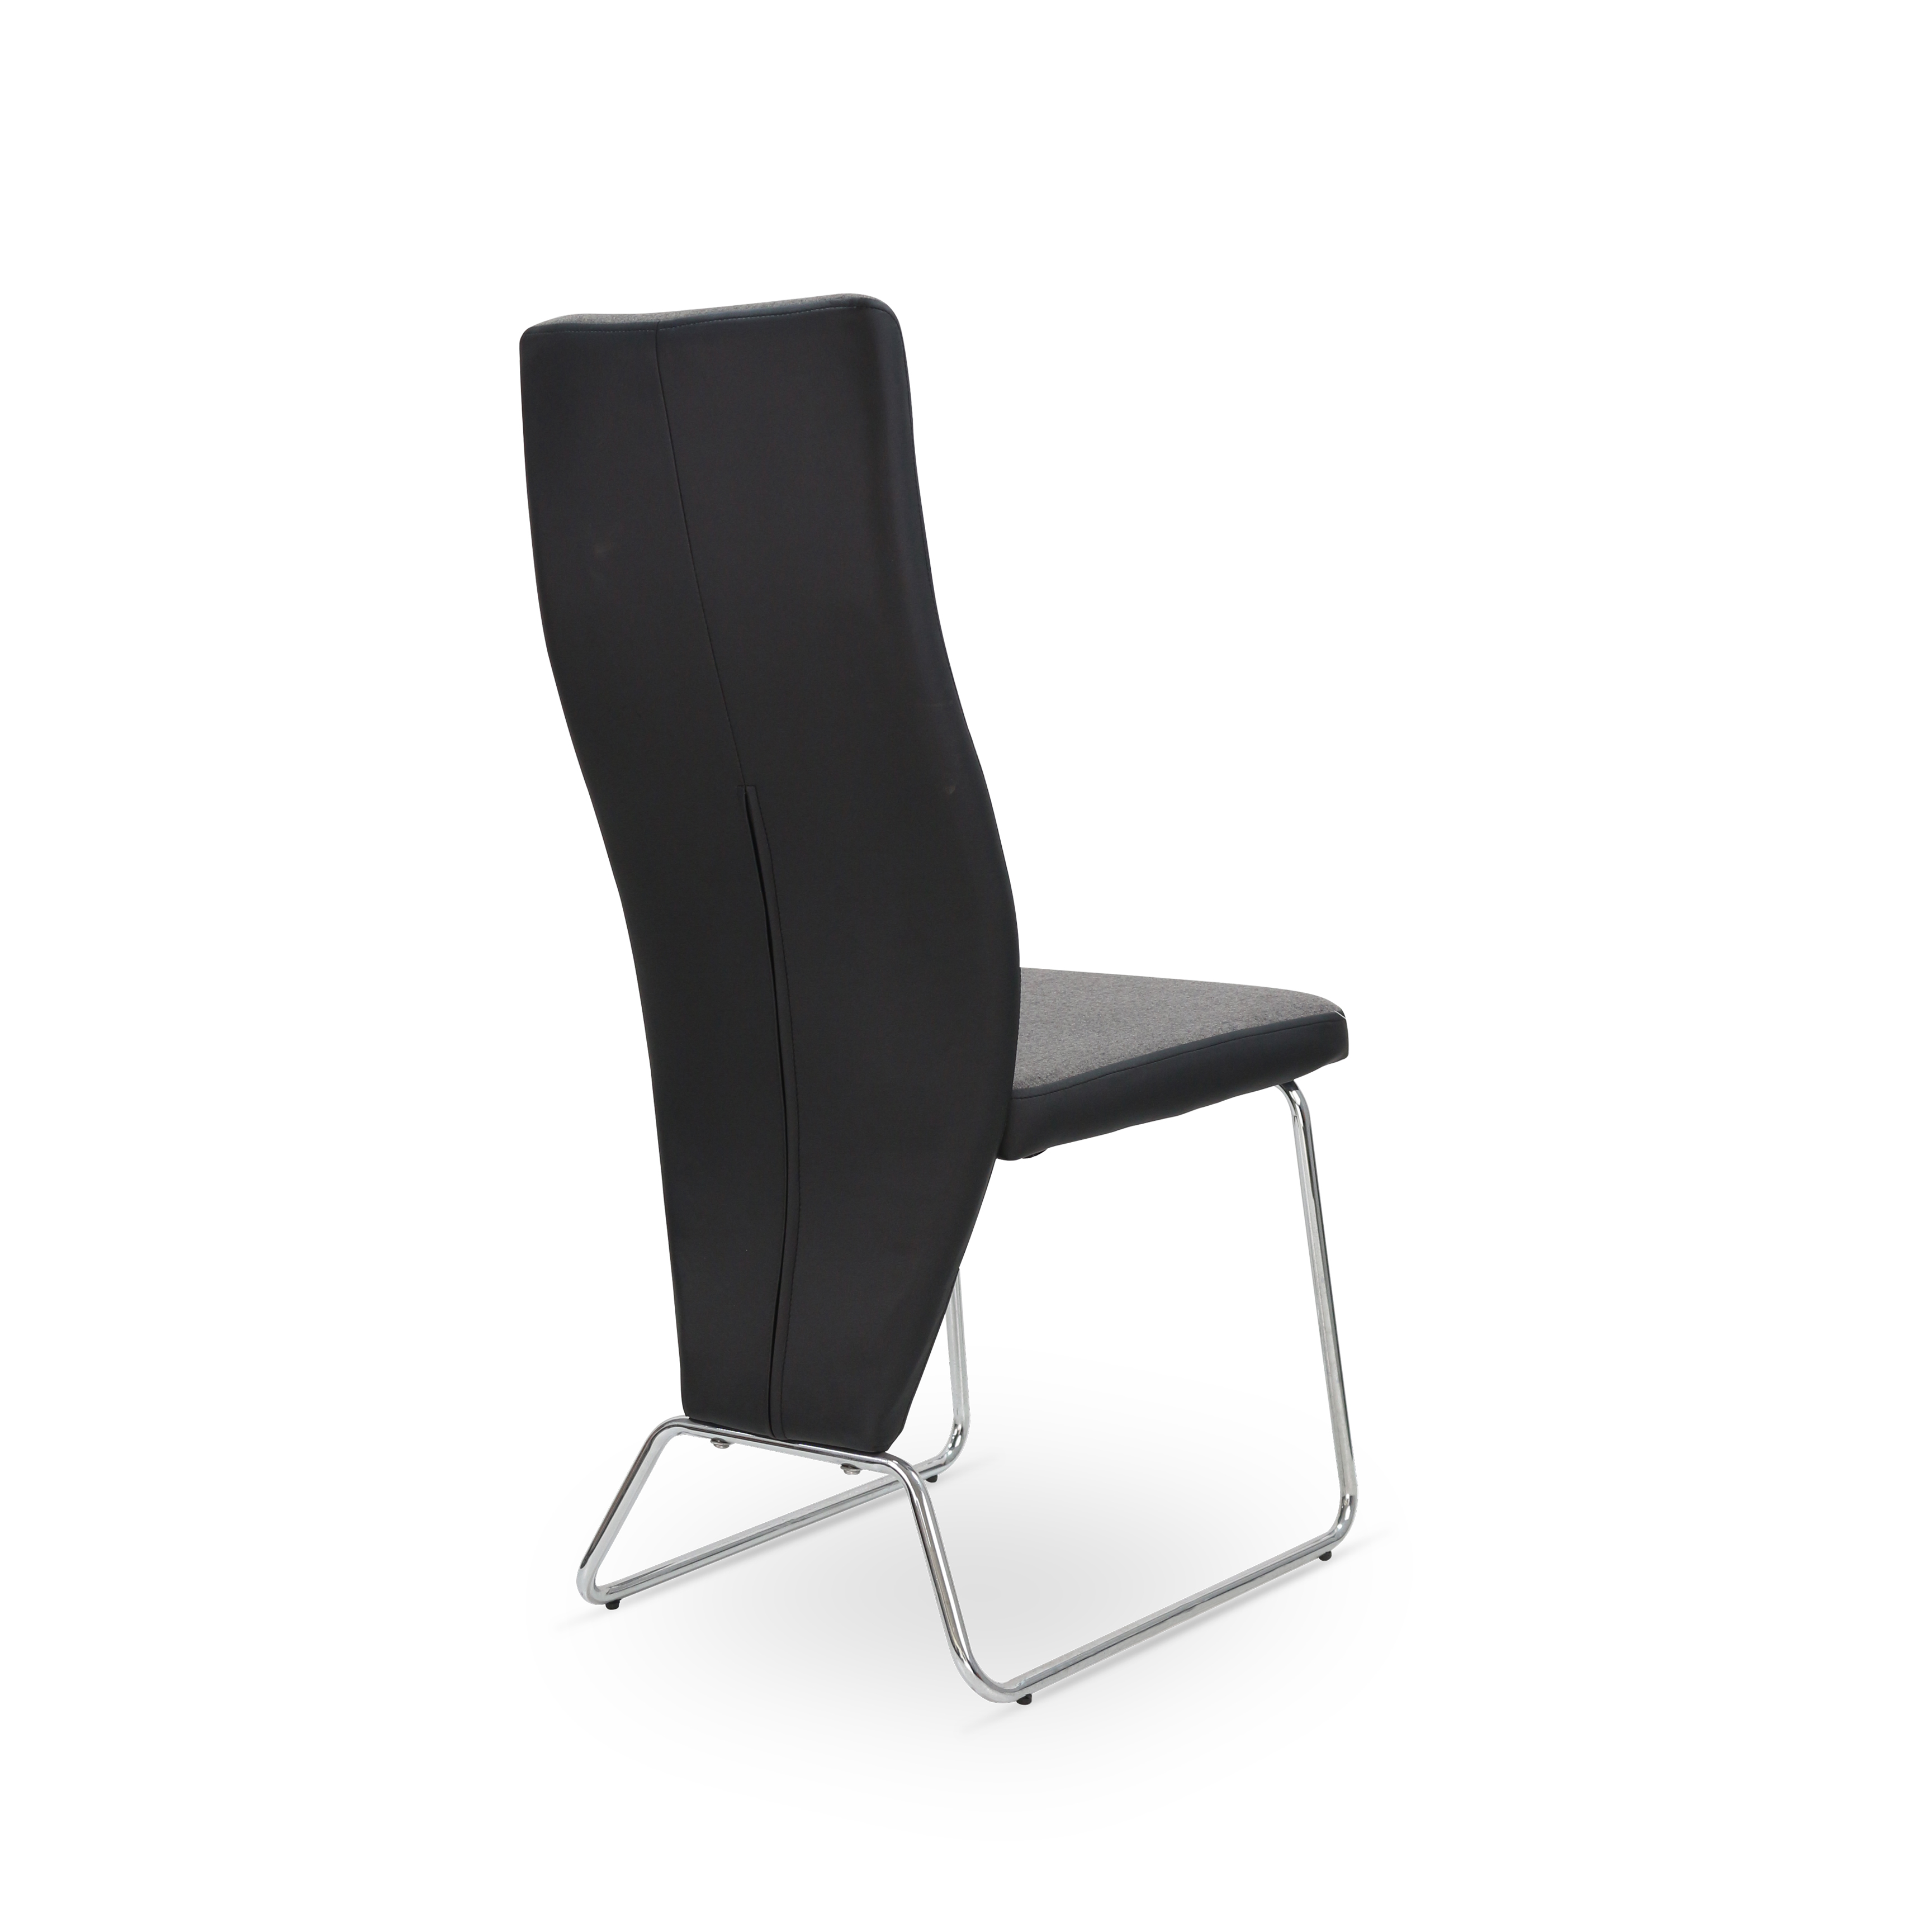 Modern High Back PU Cover Metal Leg Chair for dining room or living room